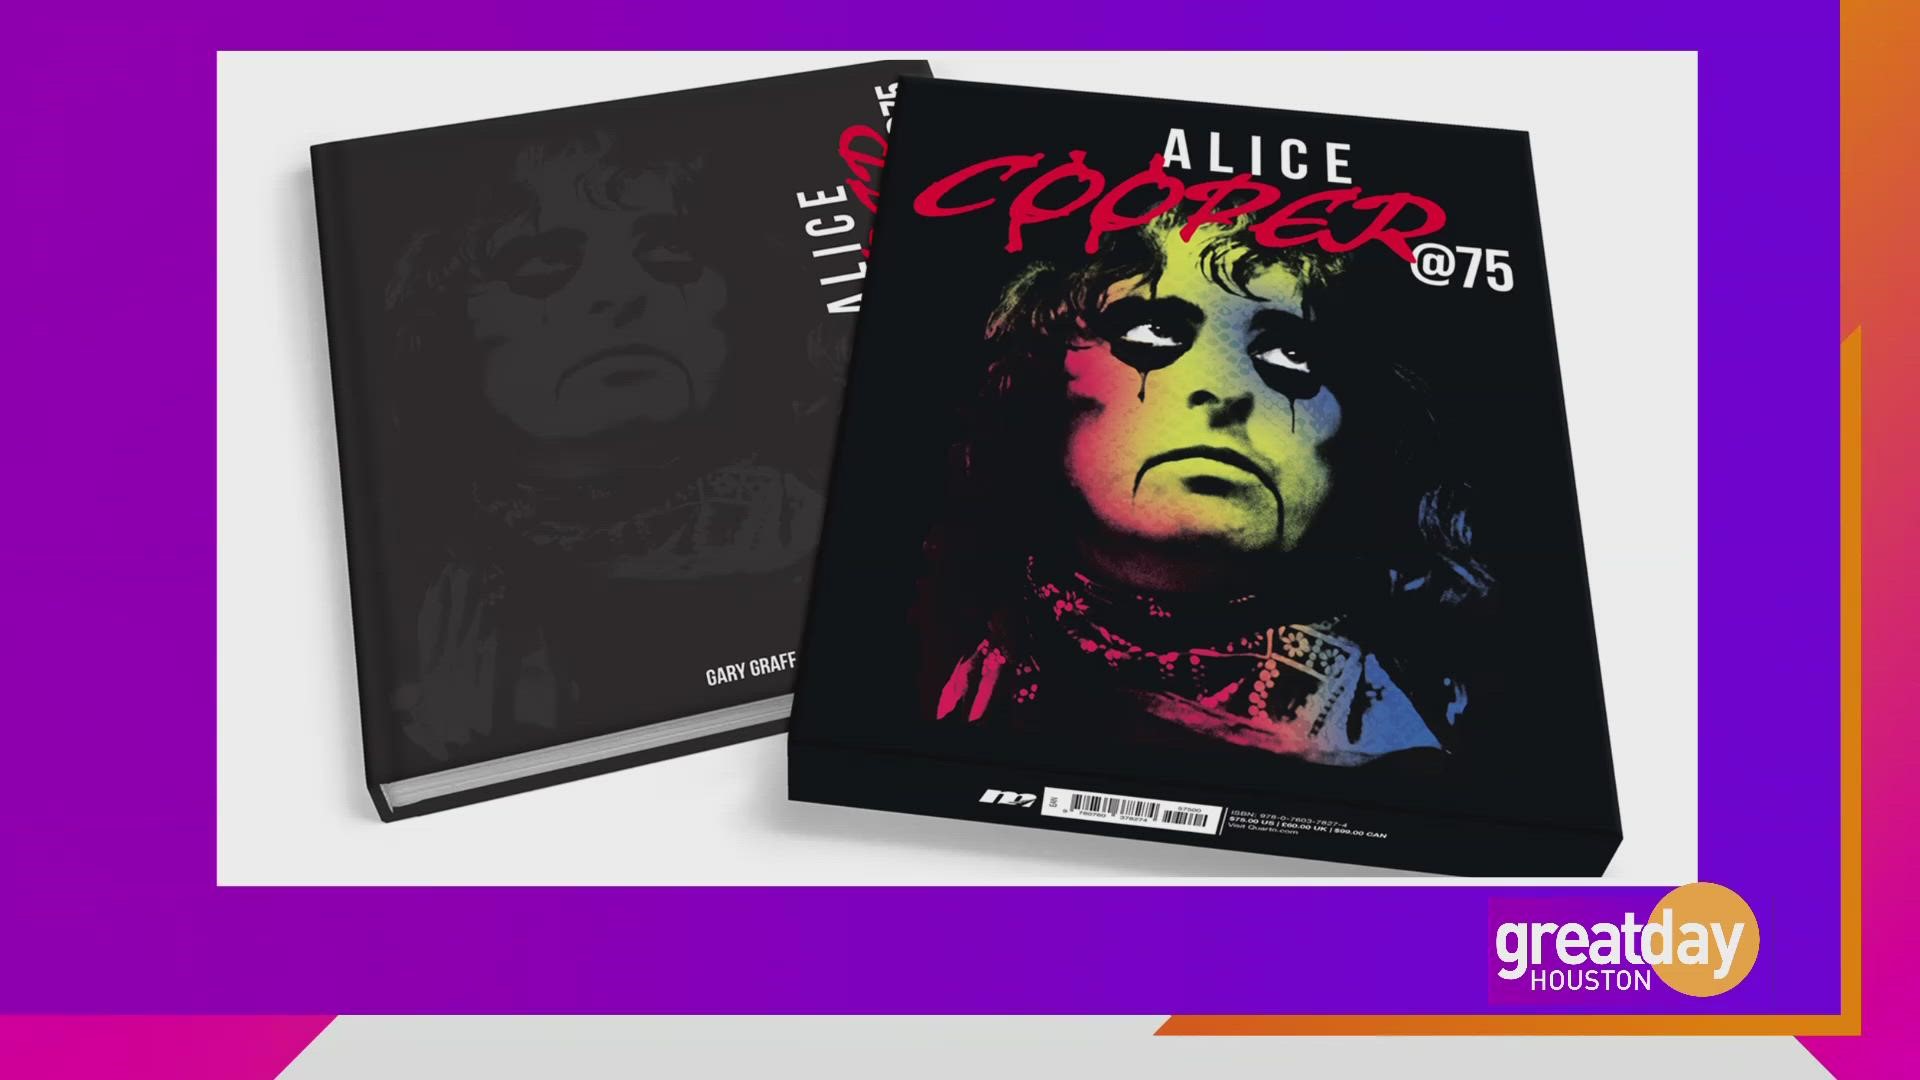 An incredibly exhaustive and beautifully illustrated book on the life, career and history of Alice Cooper